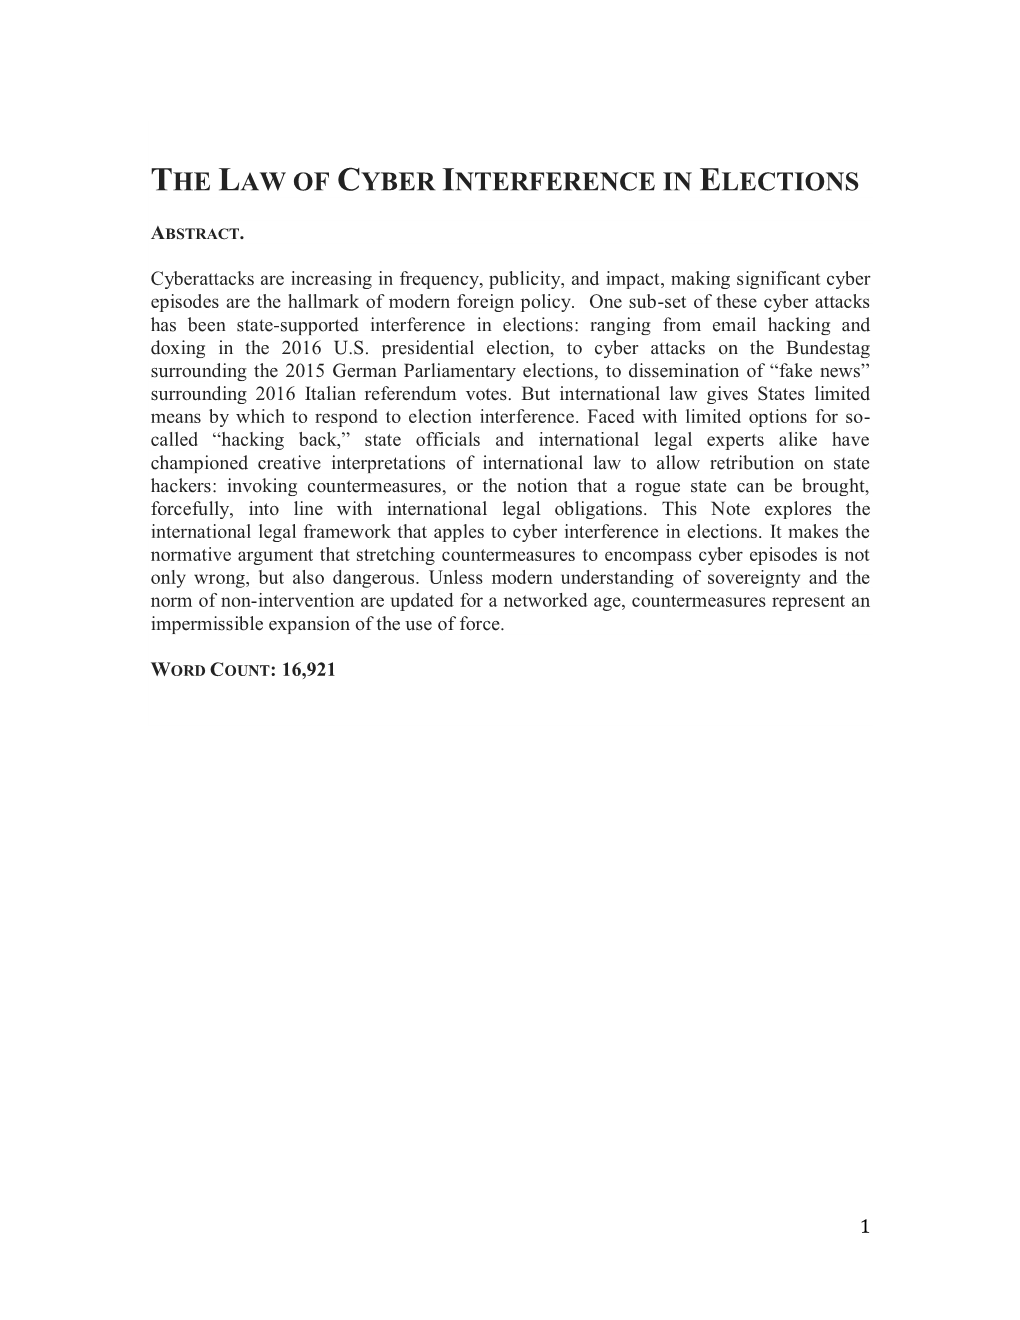 The Law of Cyber Interference in Elections